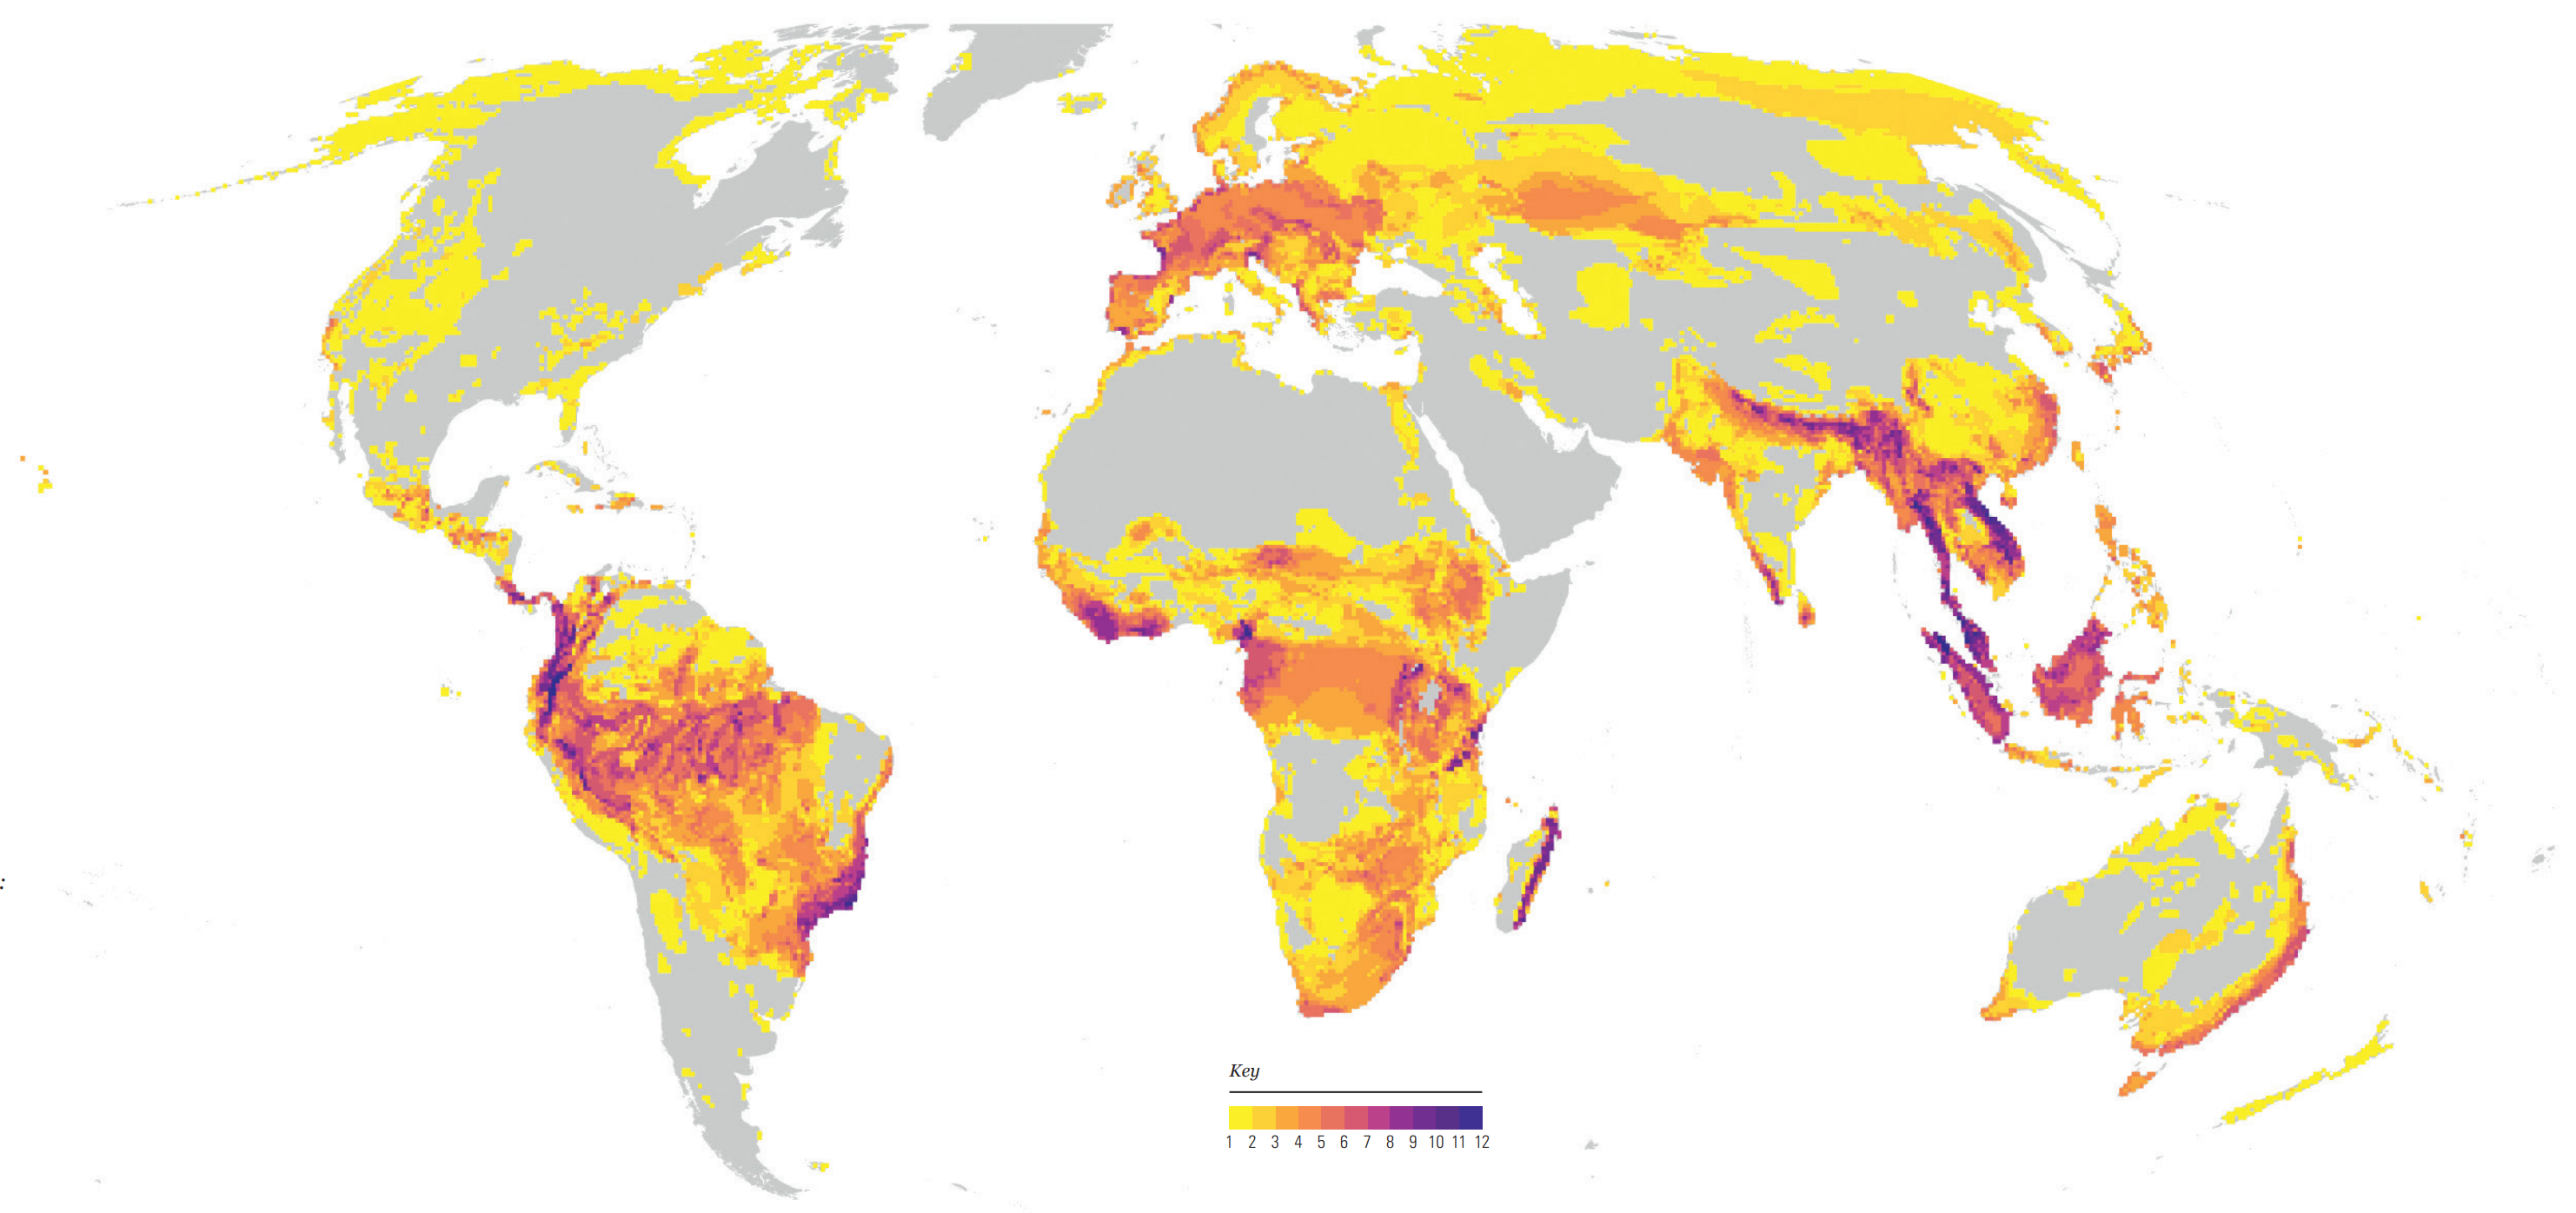 Map showing global hotspots of extinction risk in 2022. The relative importance of each pixel across species and threats as measured by the number of times a pixel falls into a hotspot region for any taxon or threat. Hotspot regions are defined as locations containing the highest 10 percent of numbers of species at risk from each major threat and taxonomic group. Source: Harfoot, et al., 2022. Graphic: WWF / ZSL